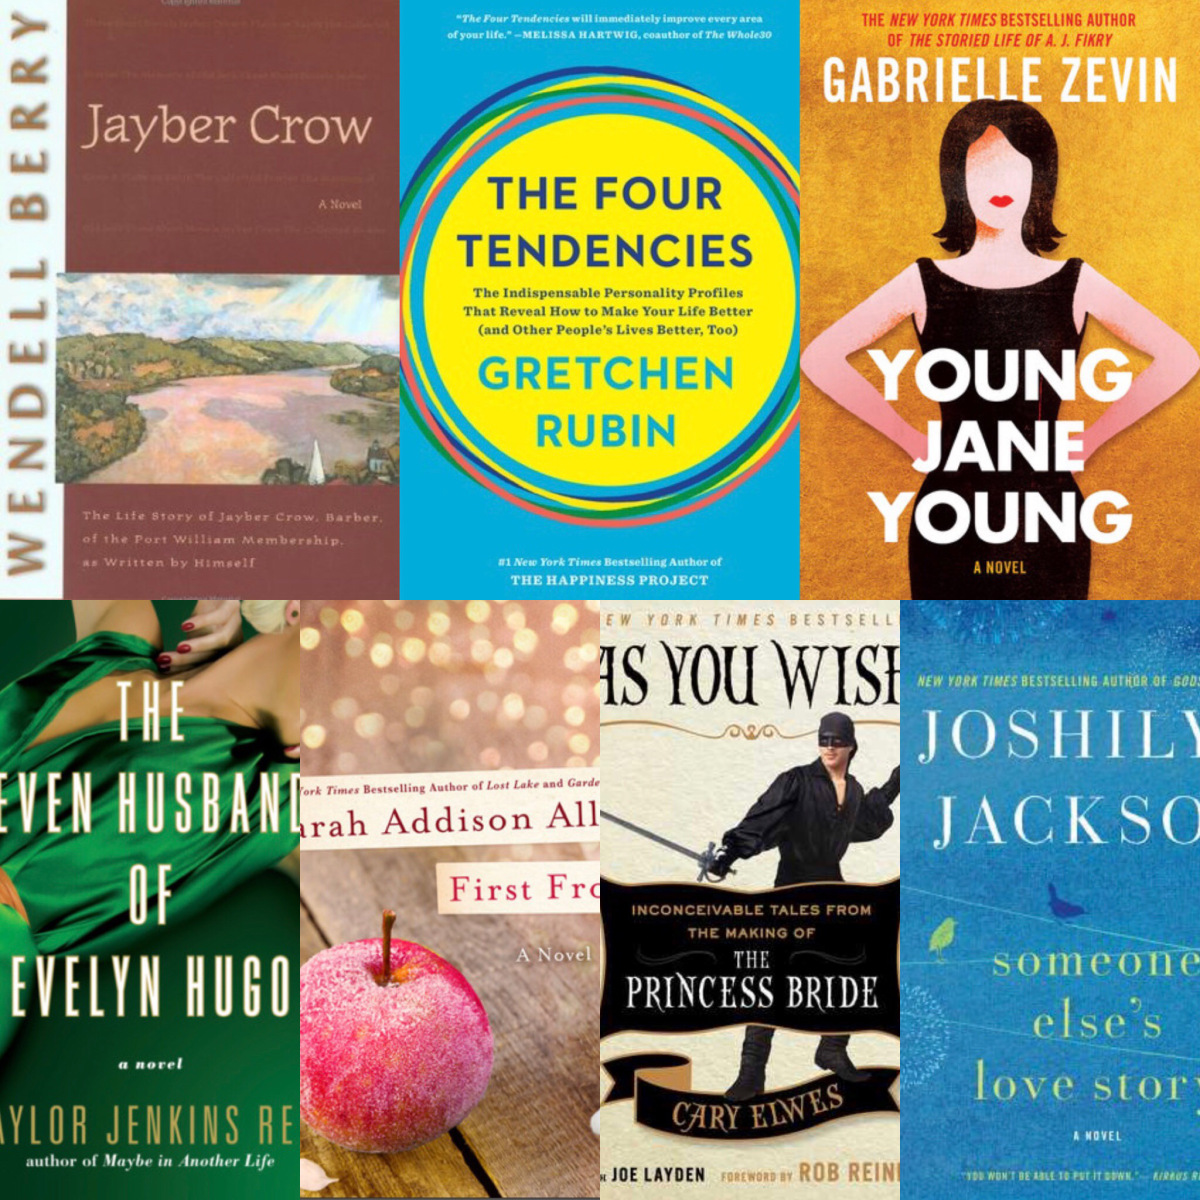 October Book Reviews: Jayber Crow, The Four Tendencies, Young Jane Young, The Seven Husbands of Evelyn Hugo, First Frost, As You Wish, Someone Else's Love Story